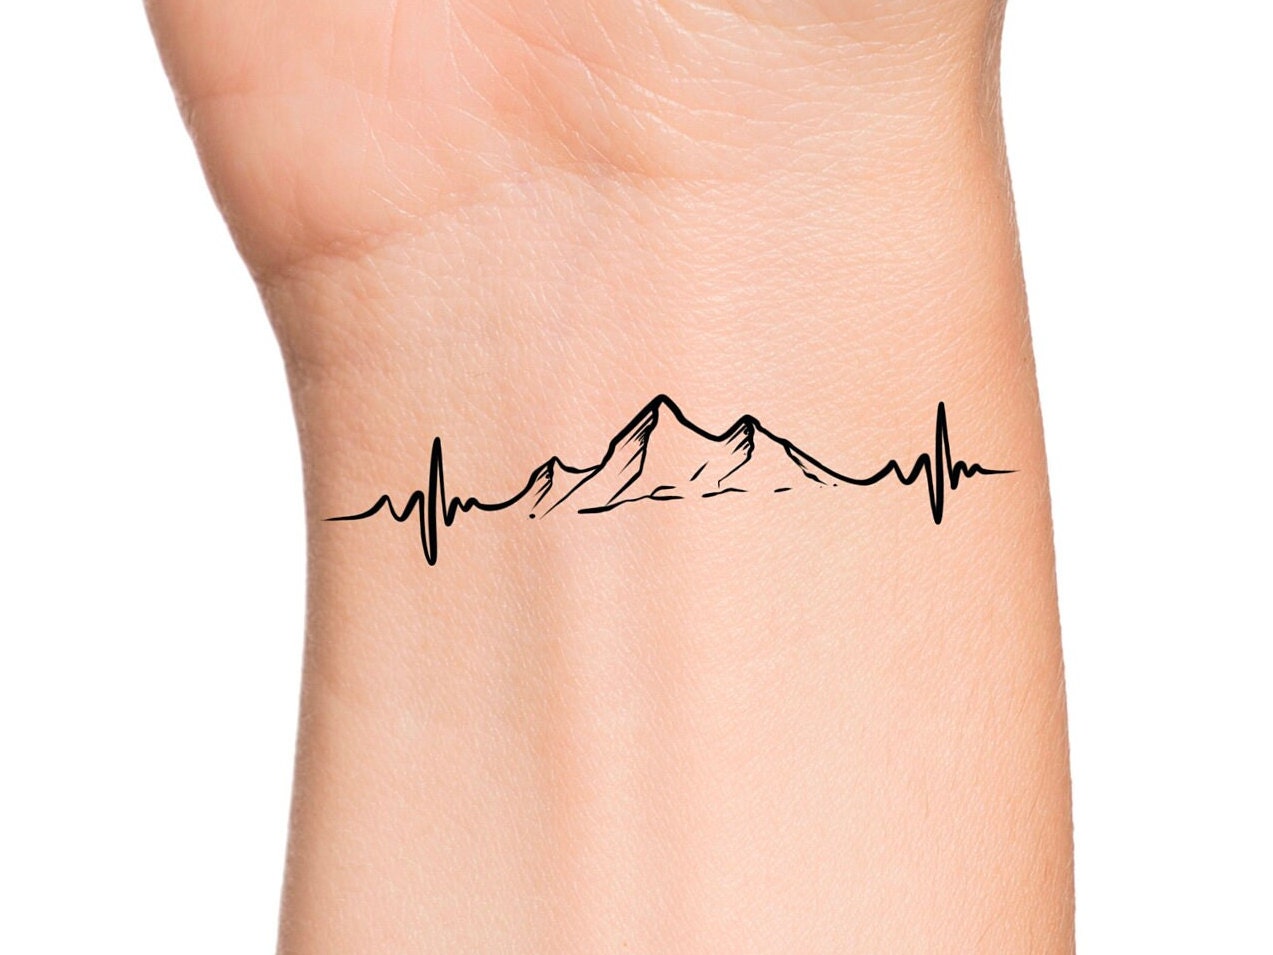 Buy Mountain Heartbeat Temporary Tattoo Online in India - Etsy